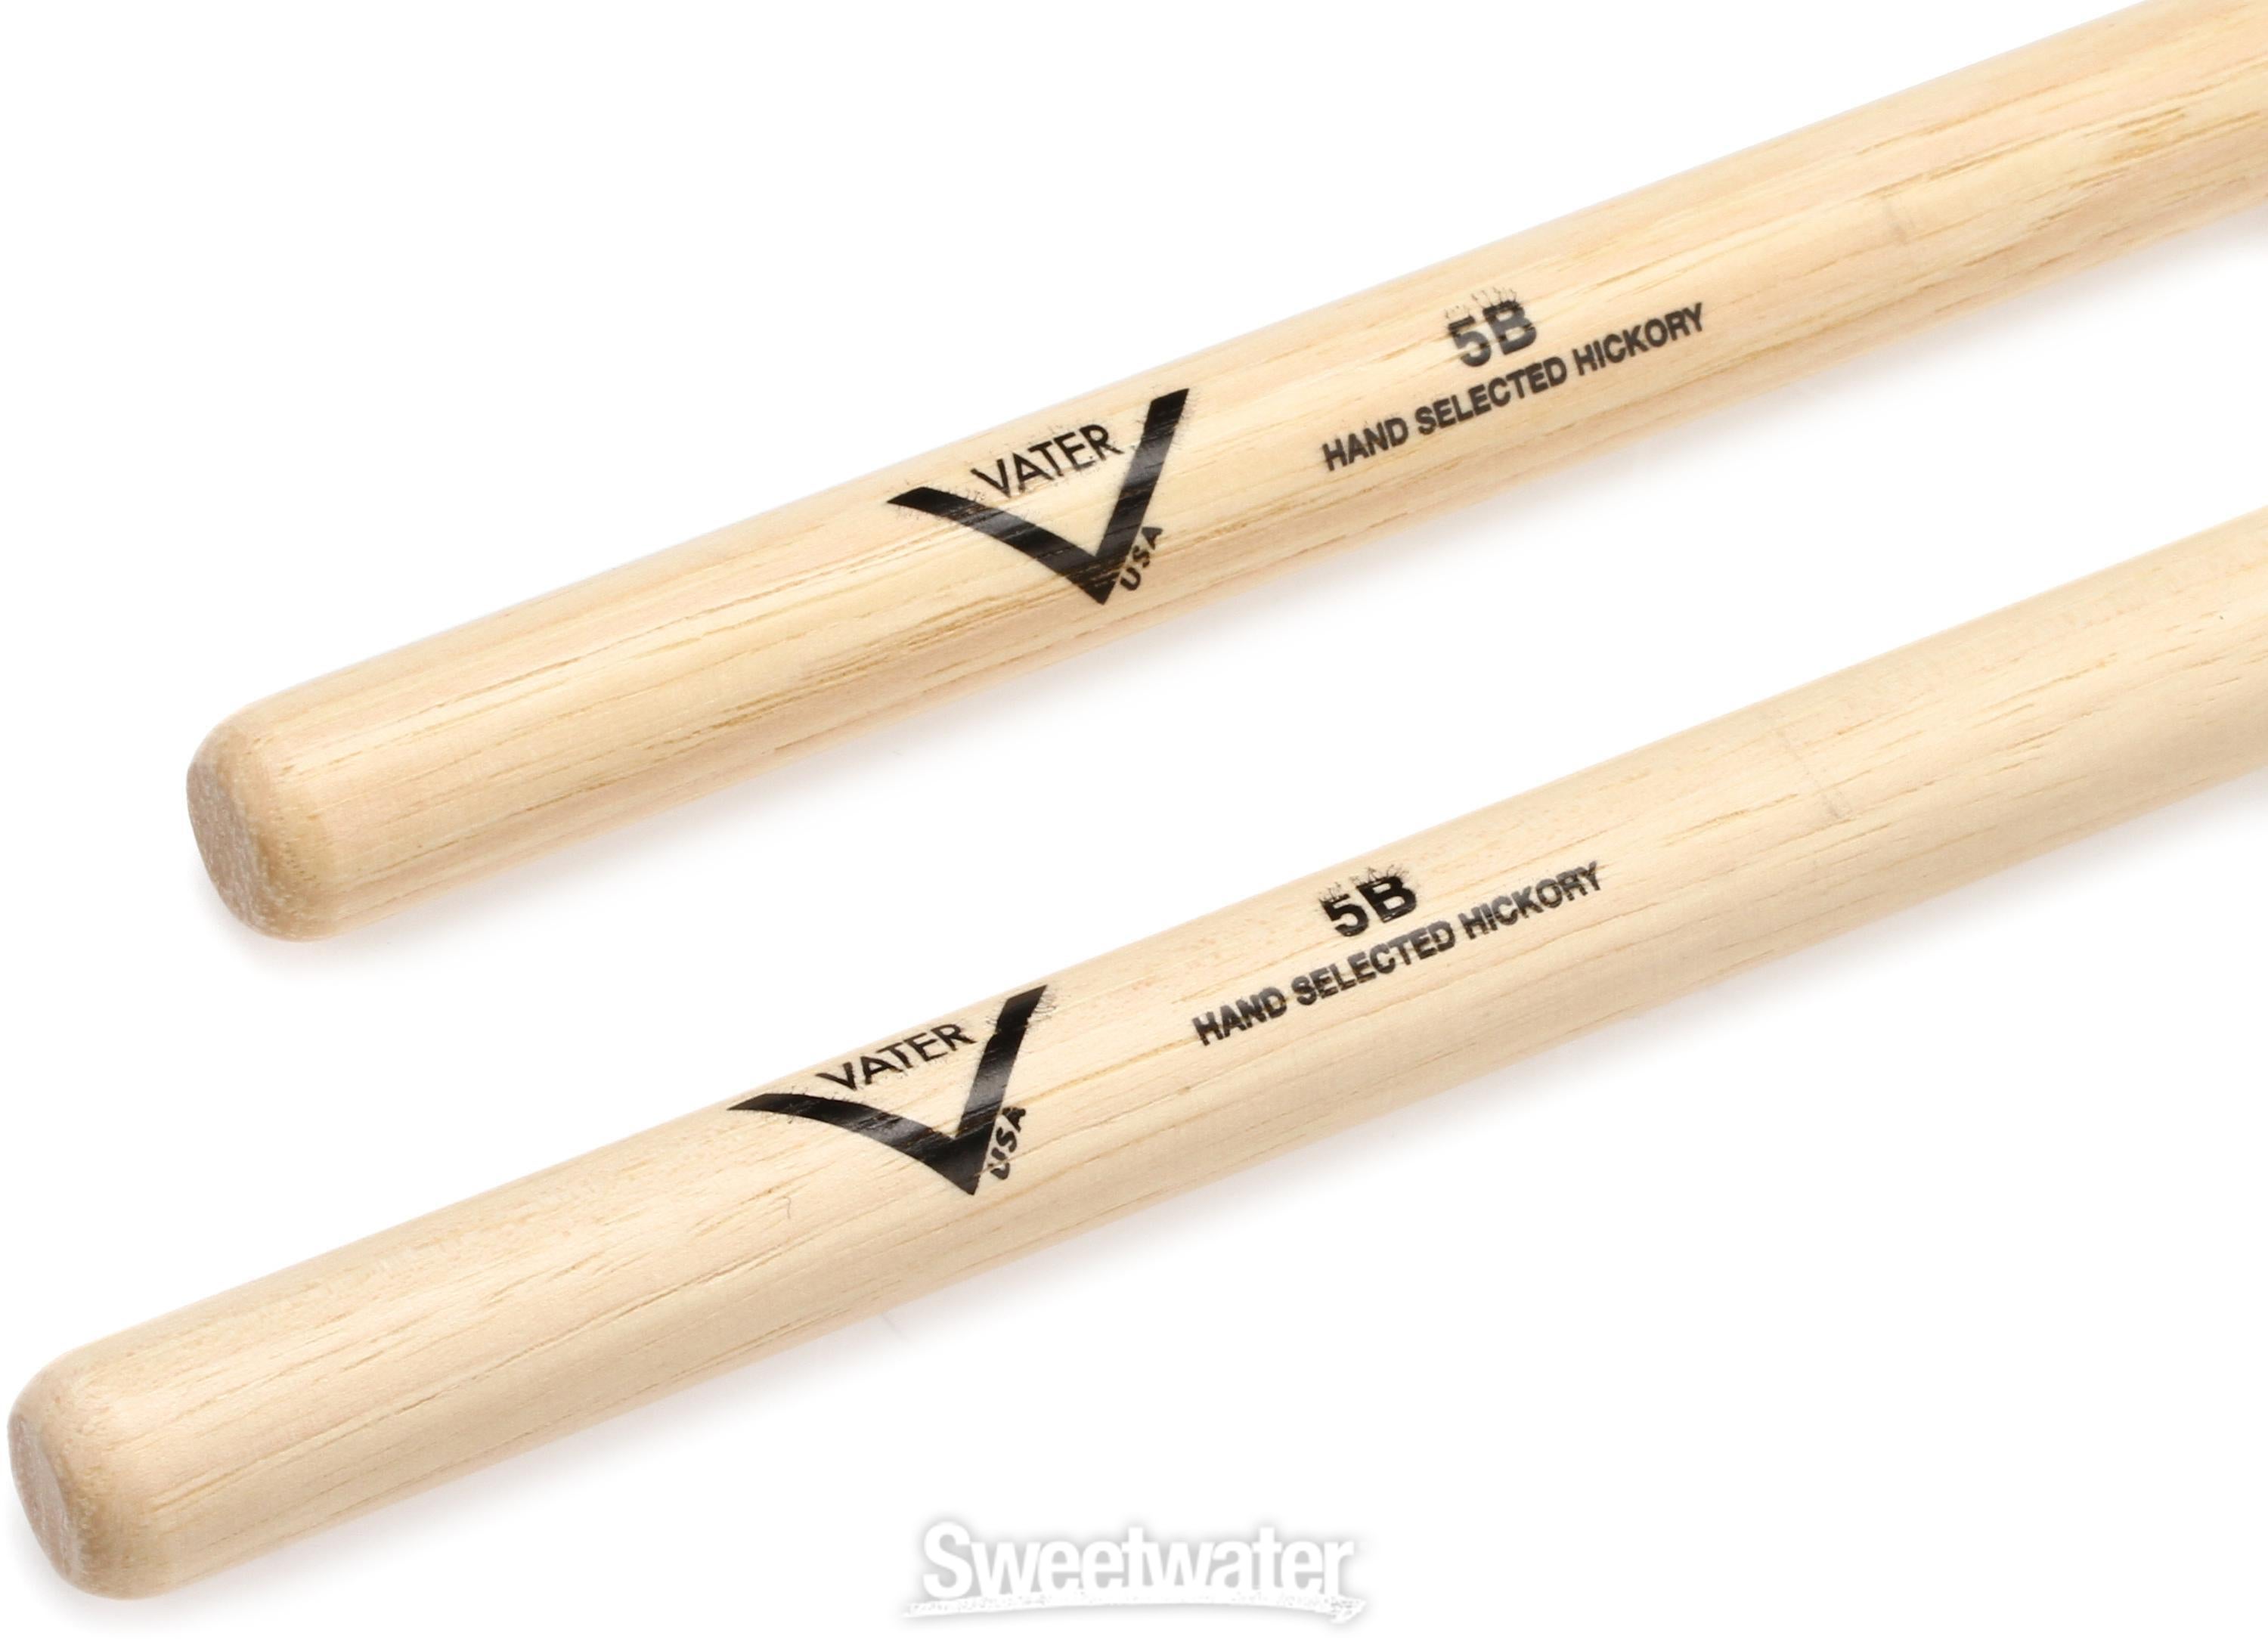 Vater Hickory Drumsticks 4-pack - 5B - Wood Tip | Sweetwater